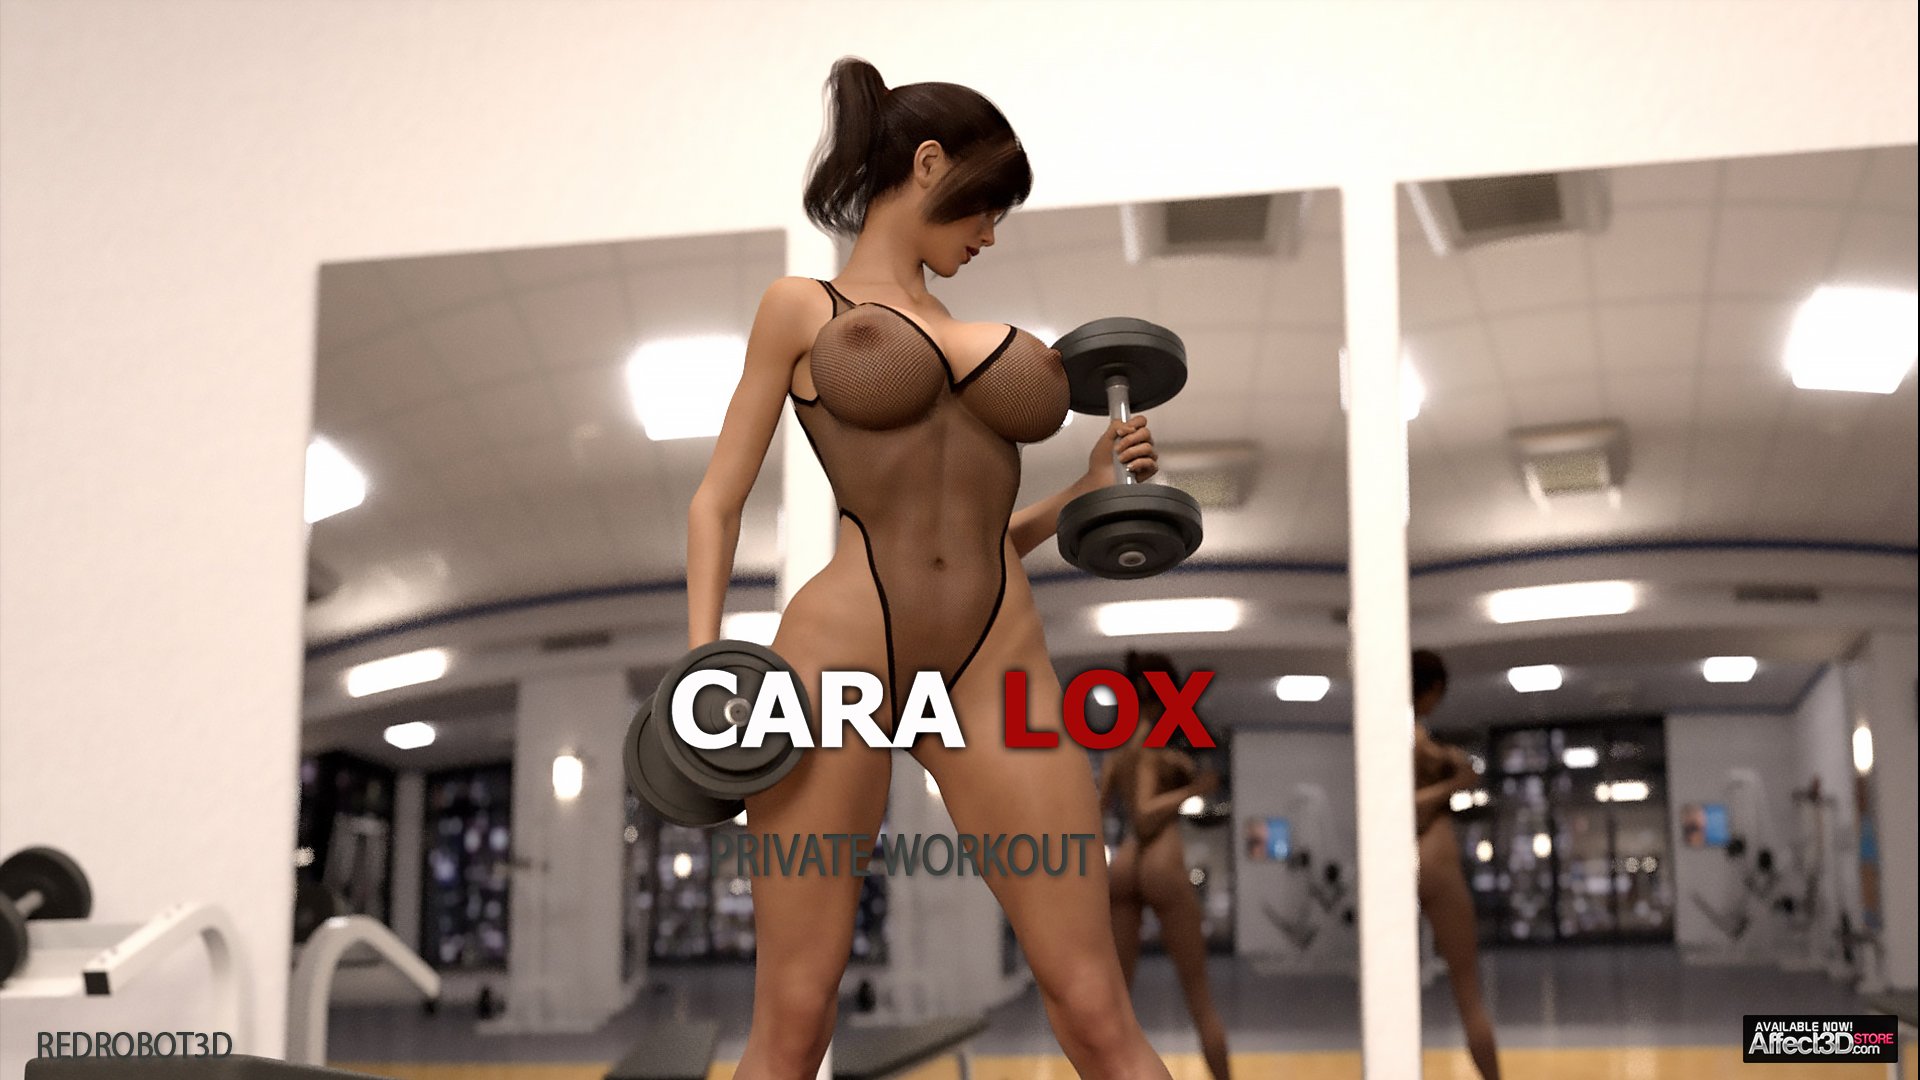 New Releases: Lilah’s Yoga and Cara Lox – Private Workout!